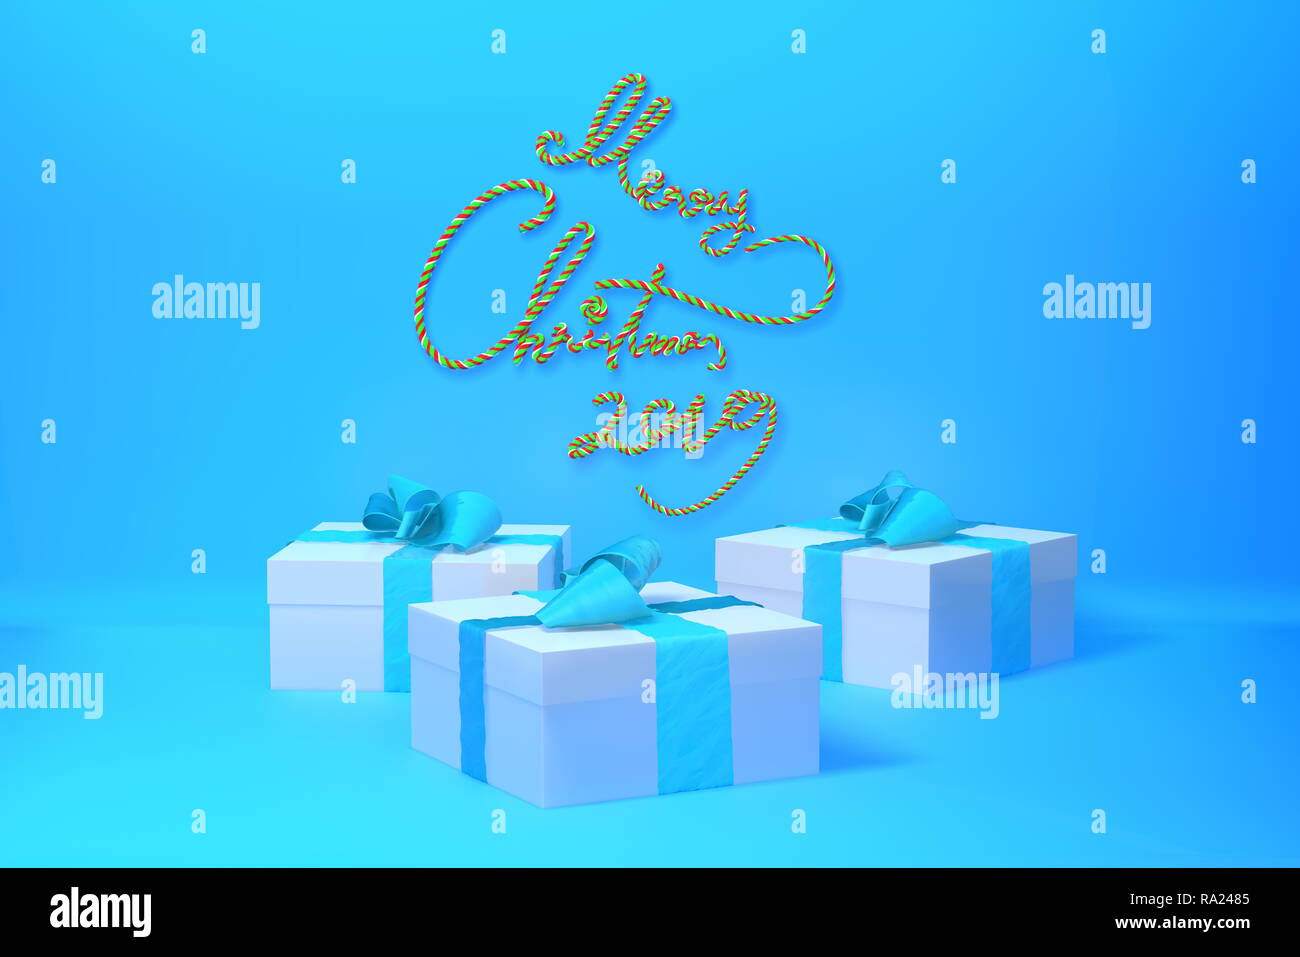 Merry Christmas 2019 lettering written by colorful stripe on blue wall and three present gift boxes with bows beside. 3d illustration Stock Photo